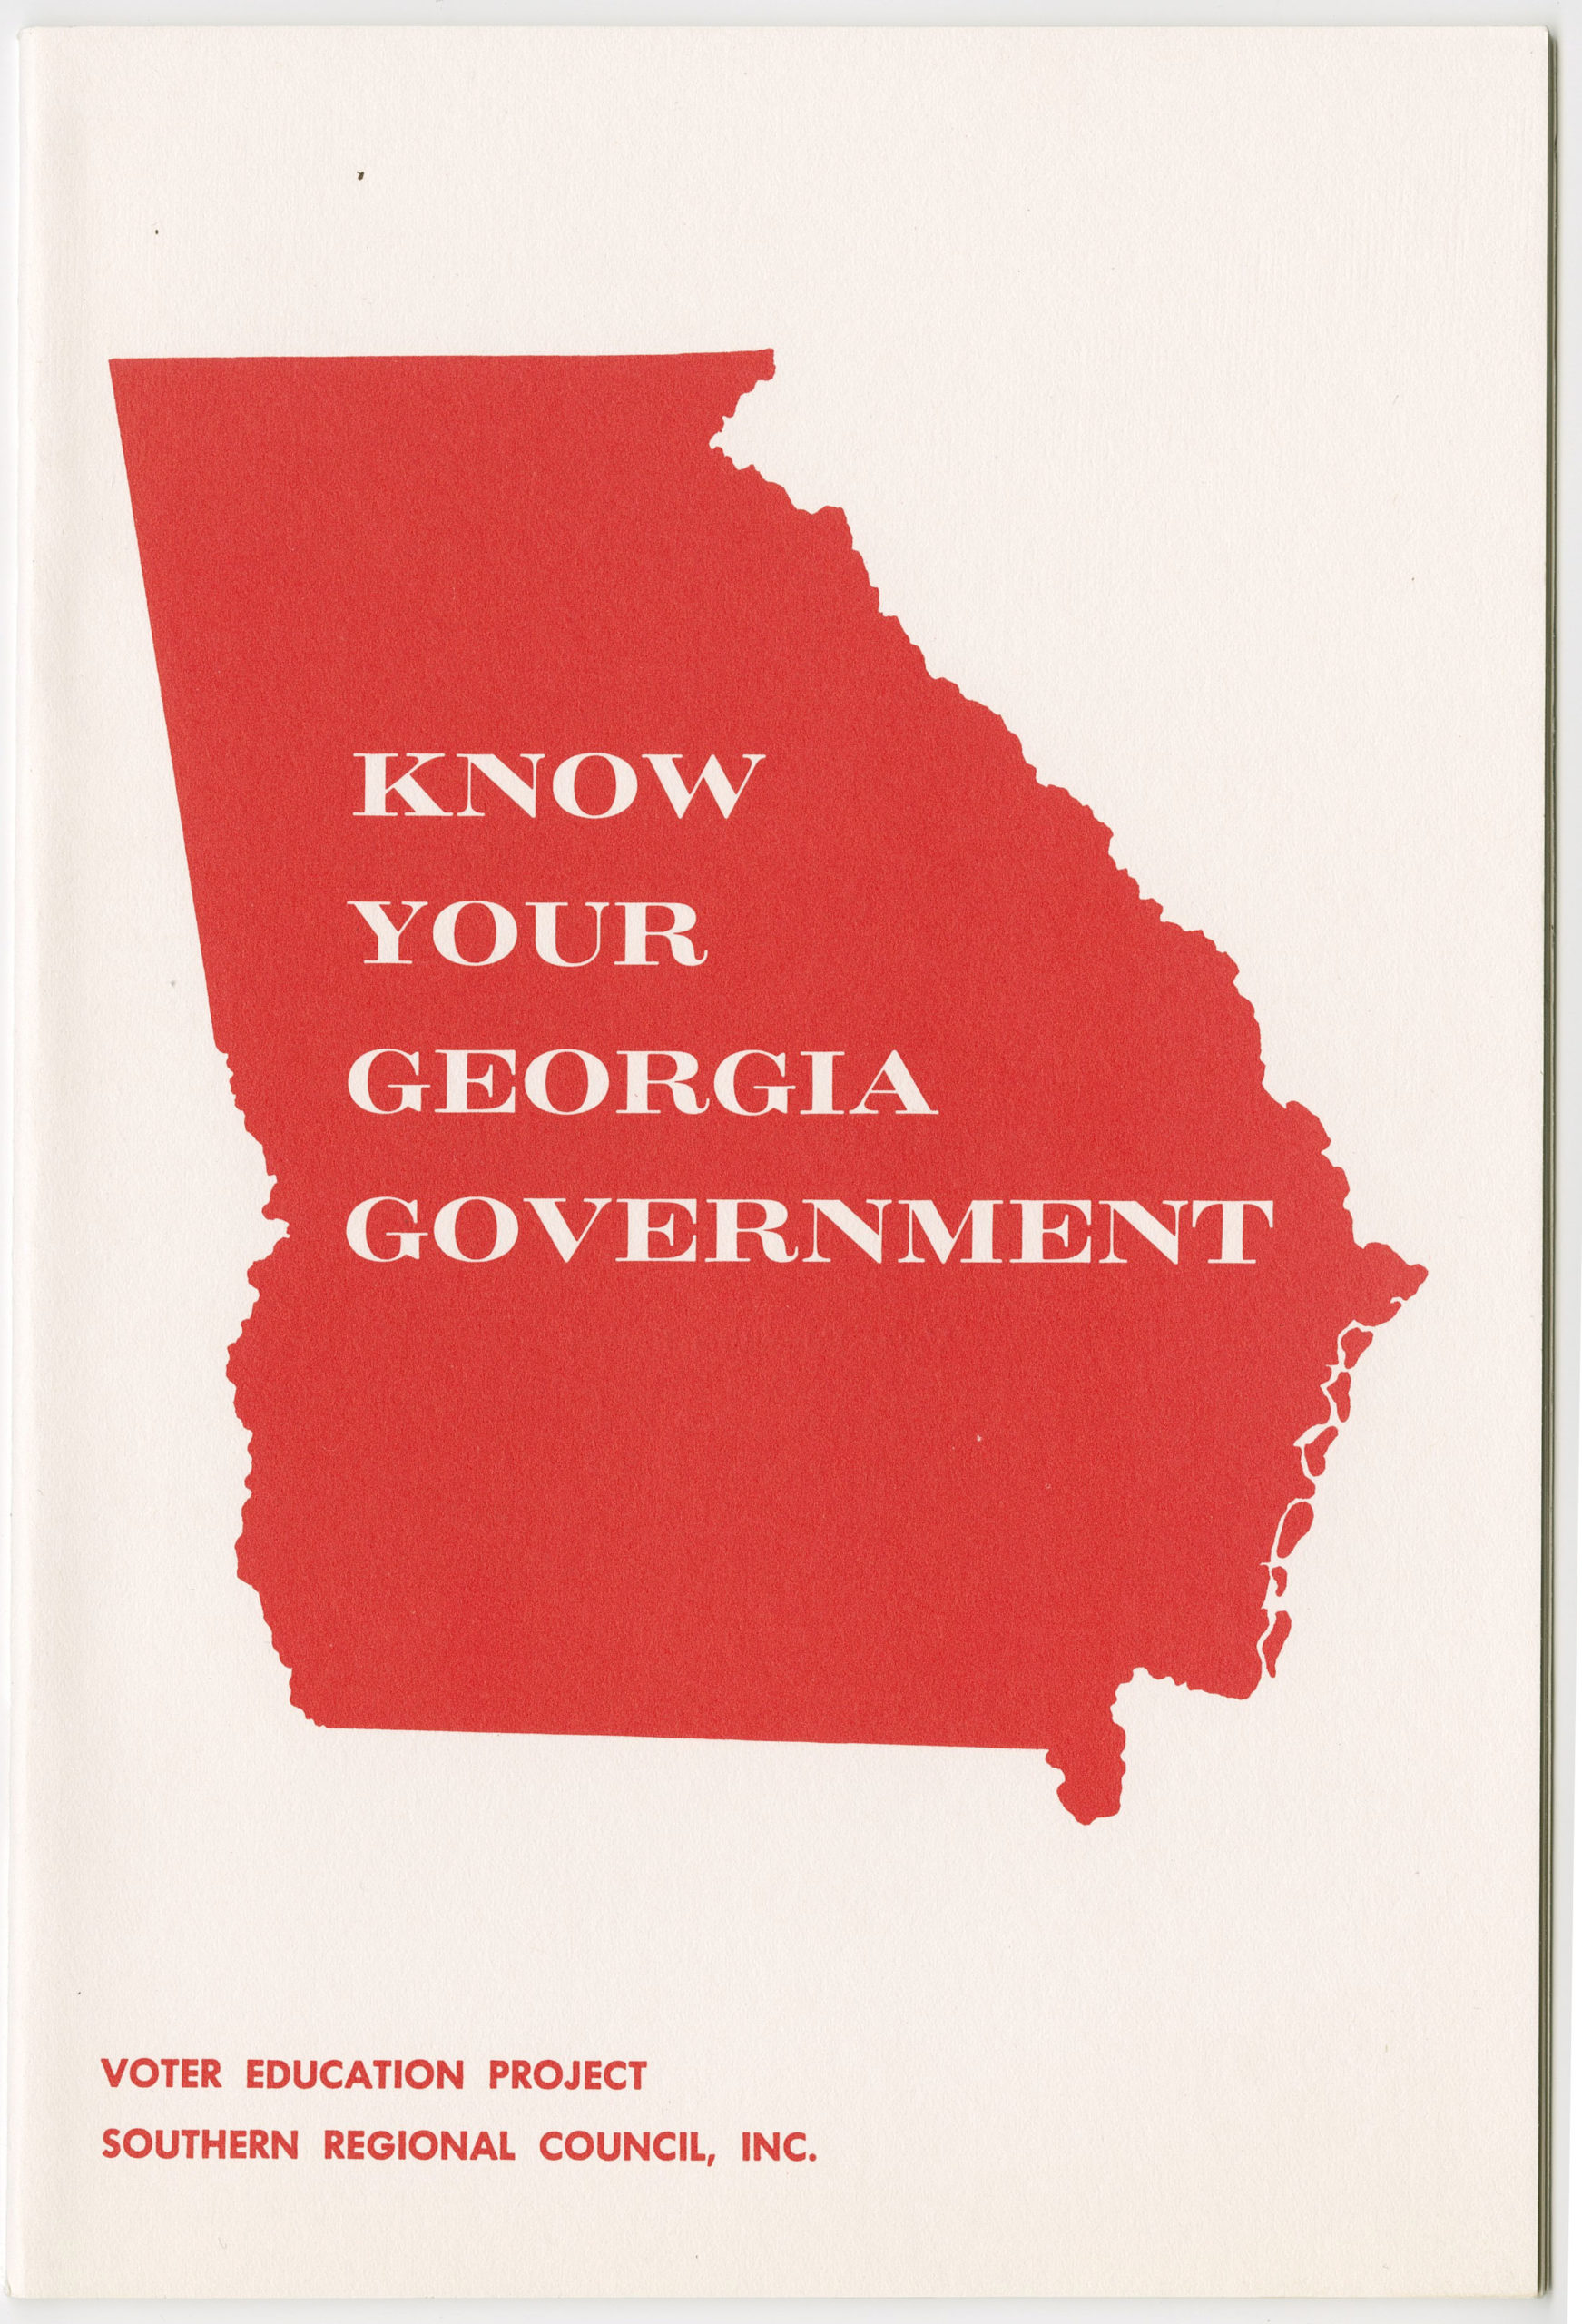 Know Your Georgia Government,Voter Education Project (Southern Regional Council),undated,John H. Wheeler collection